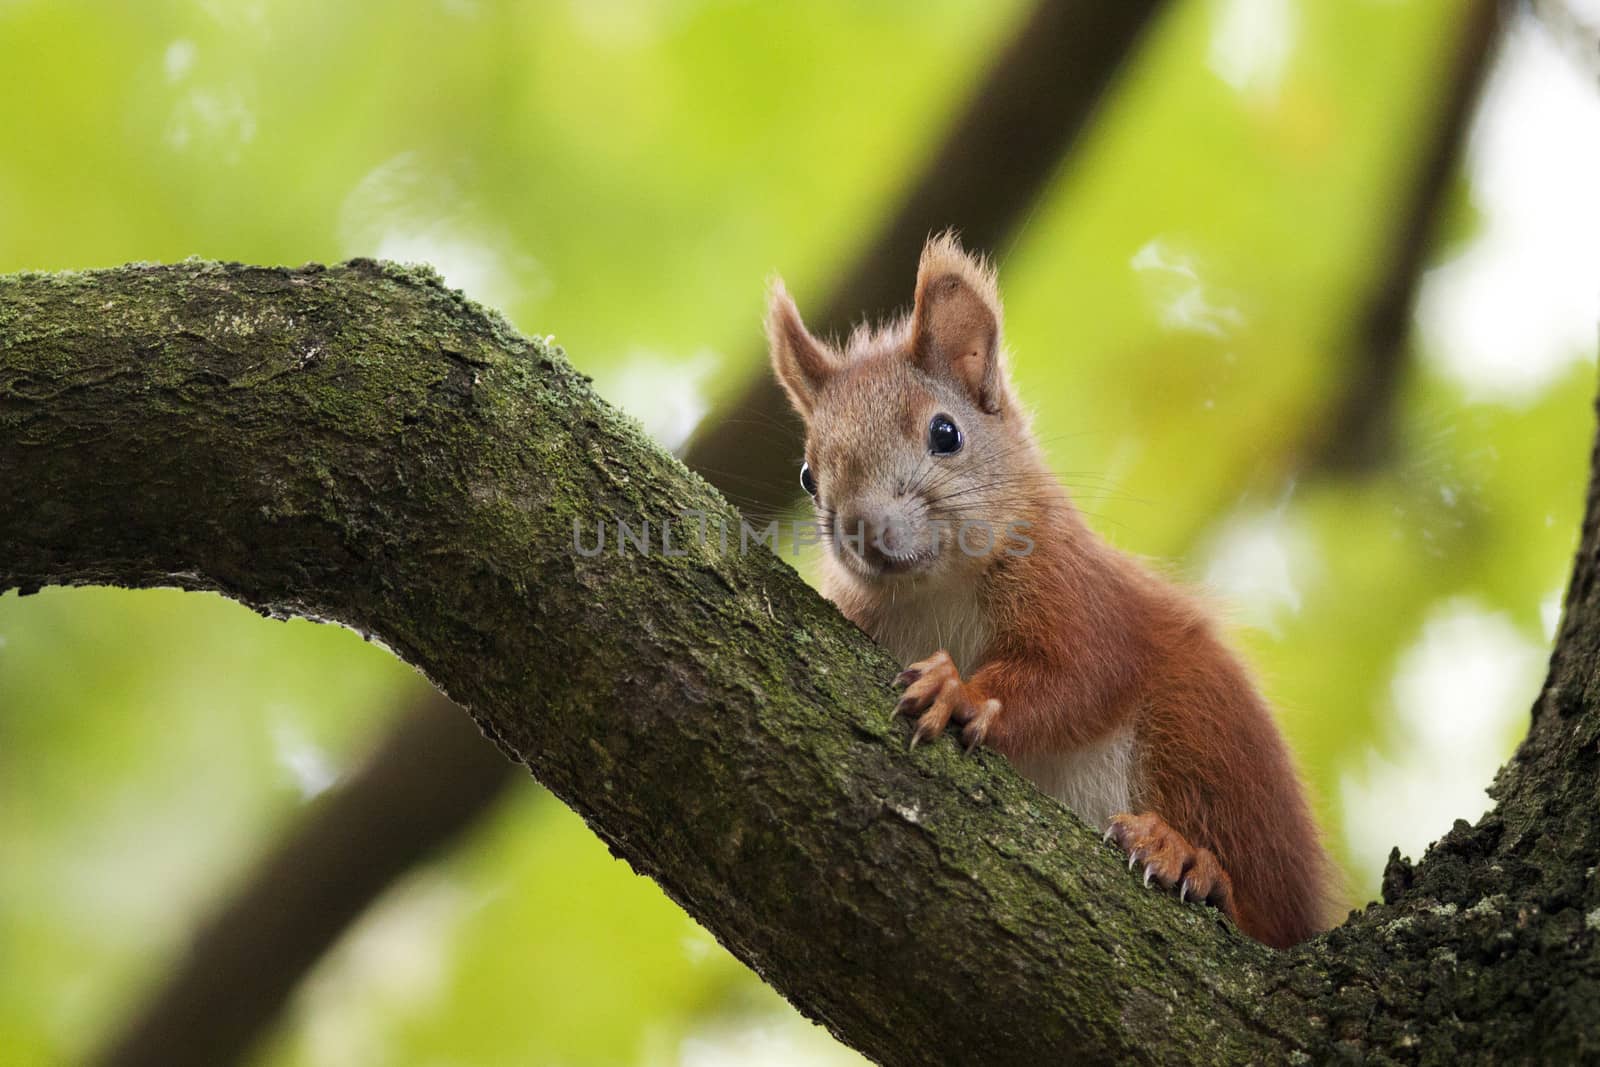 The red squirrel in the wild, in the forest.